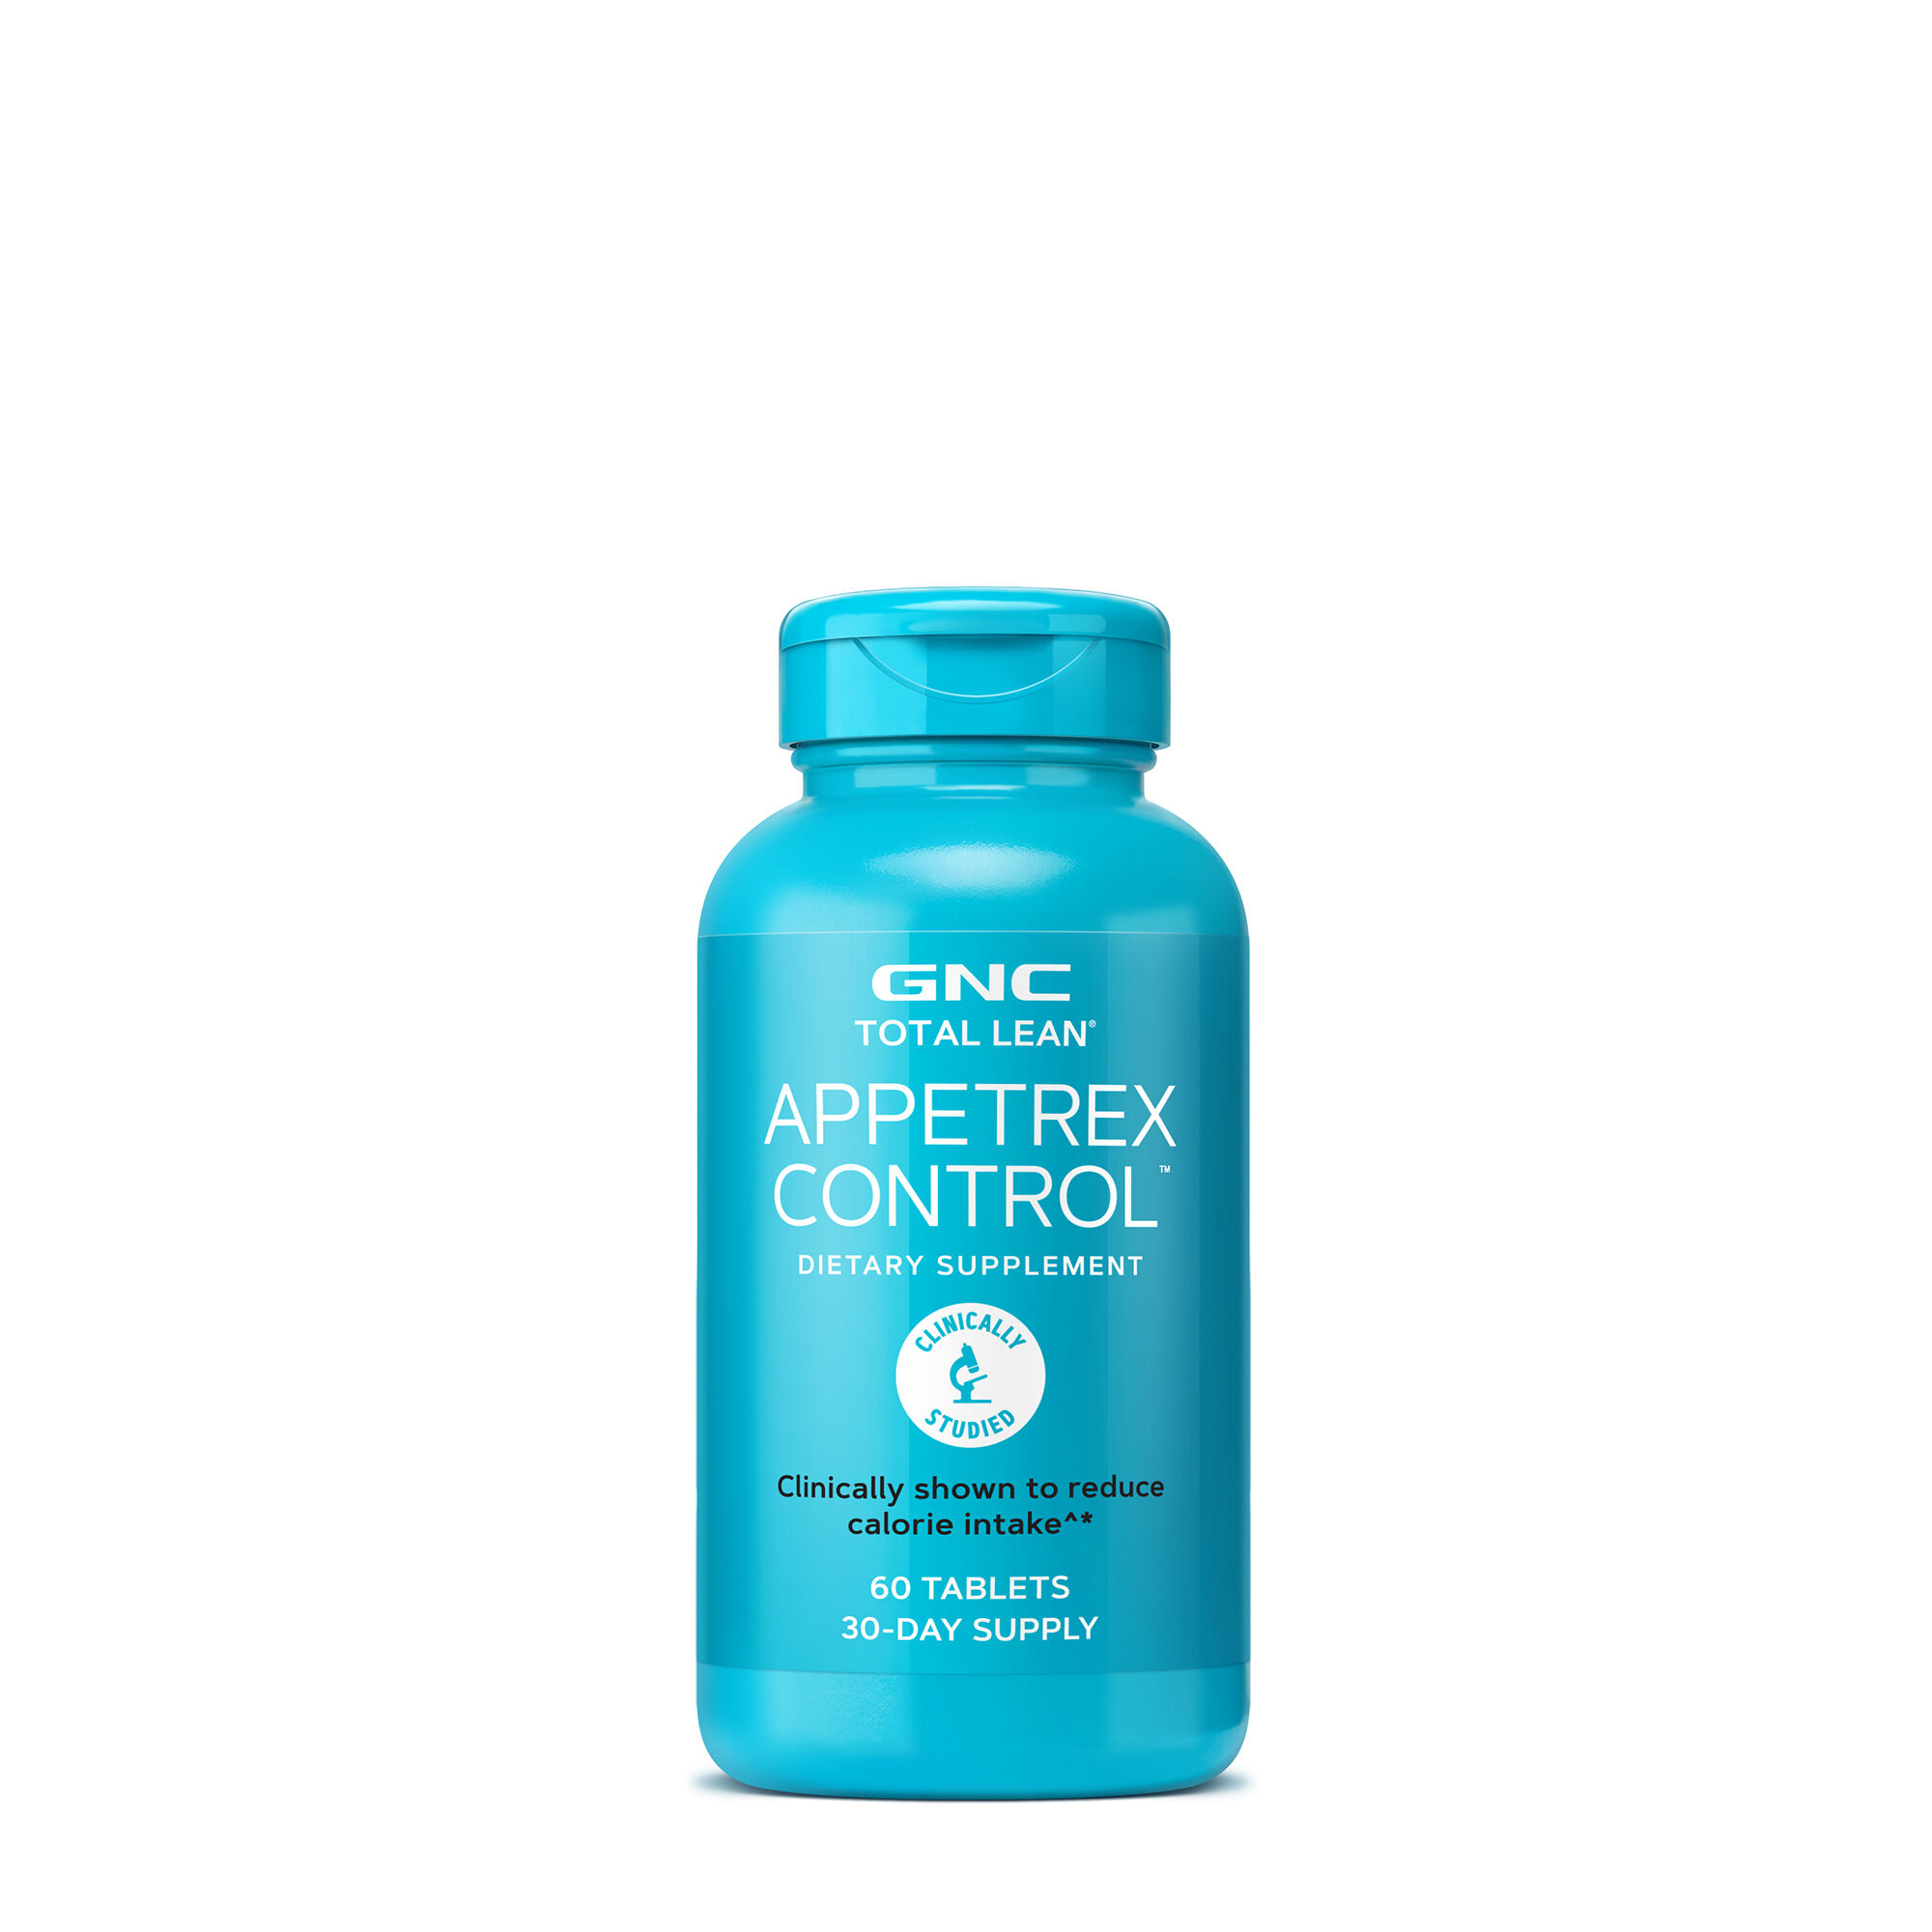 Does Gnc Sell Phentermine D